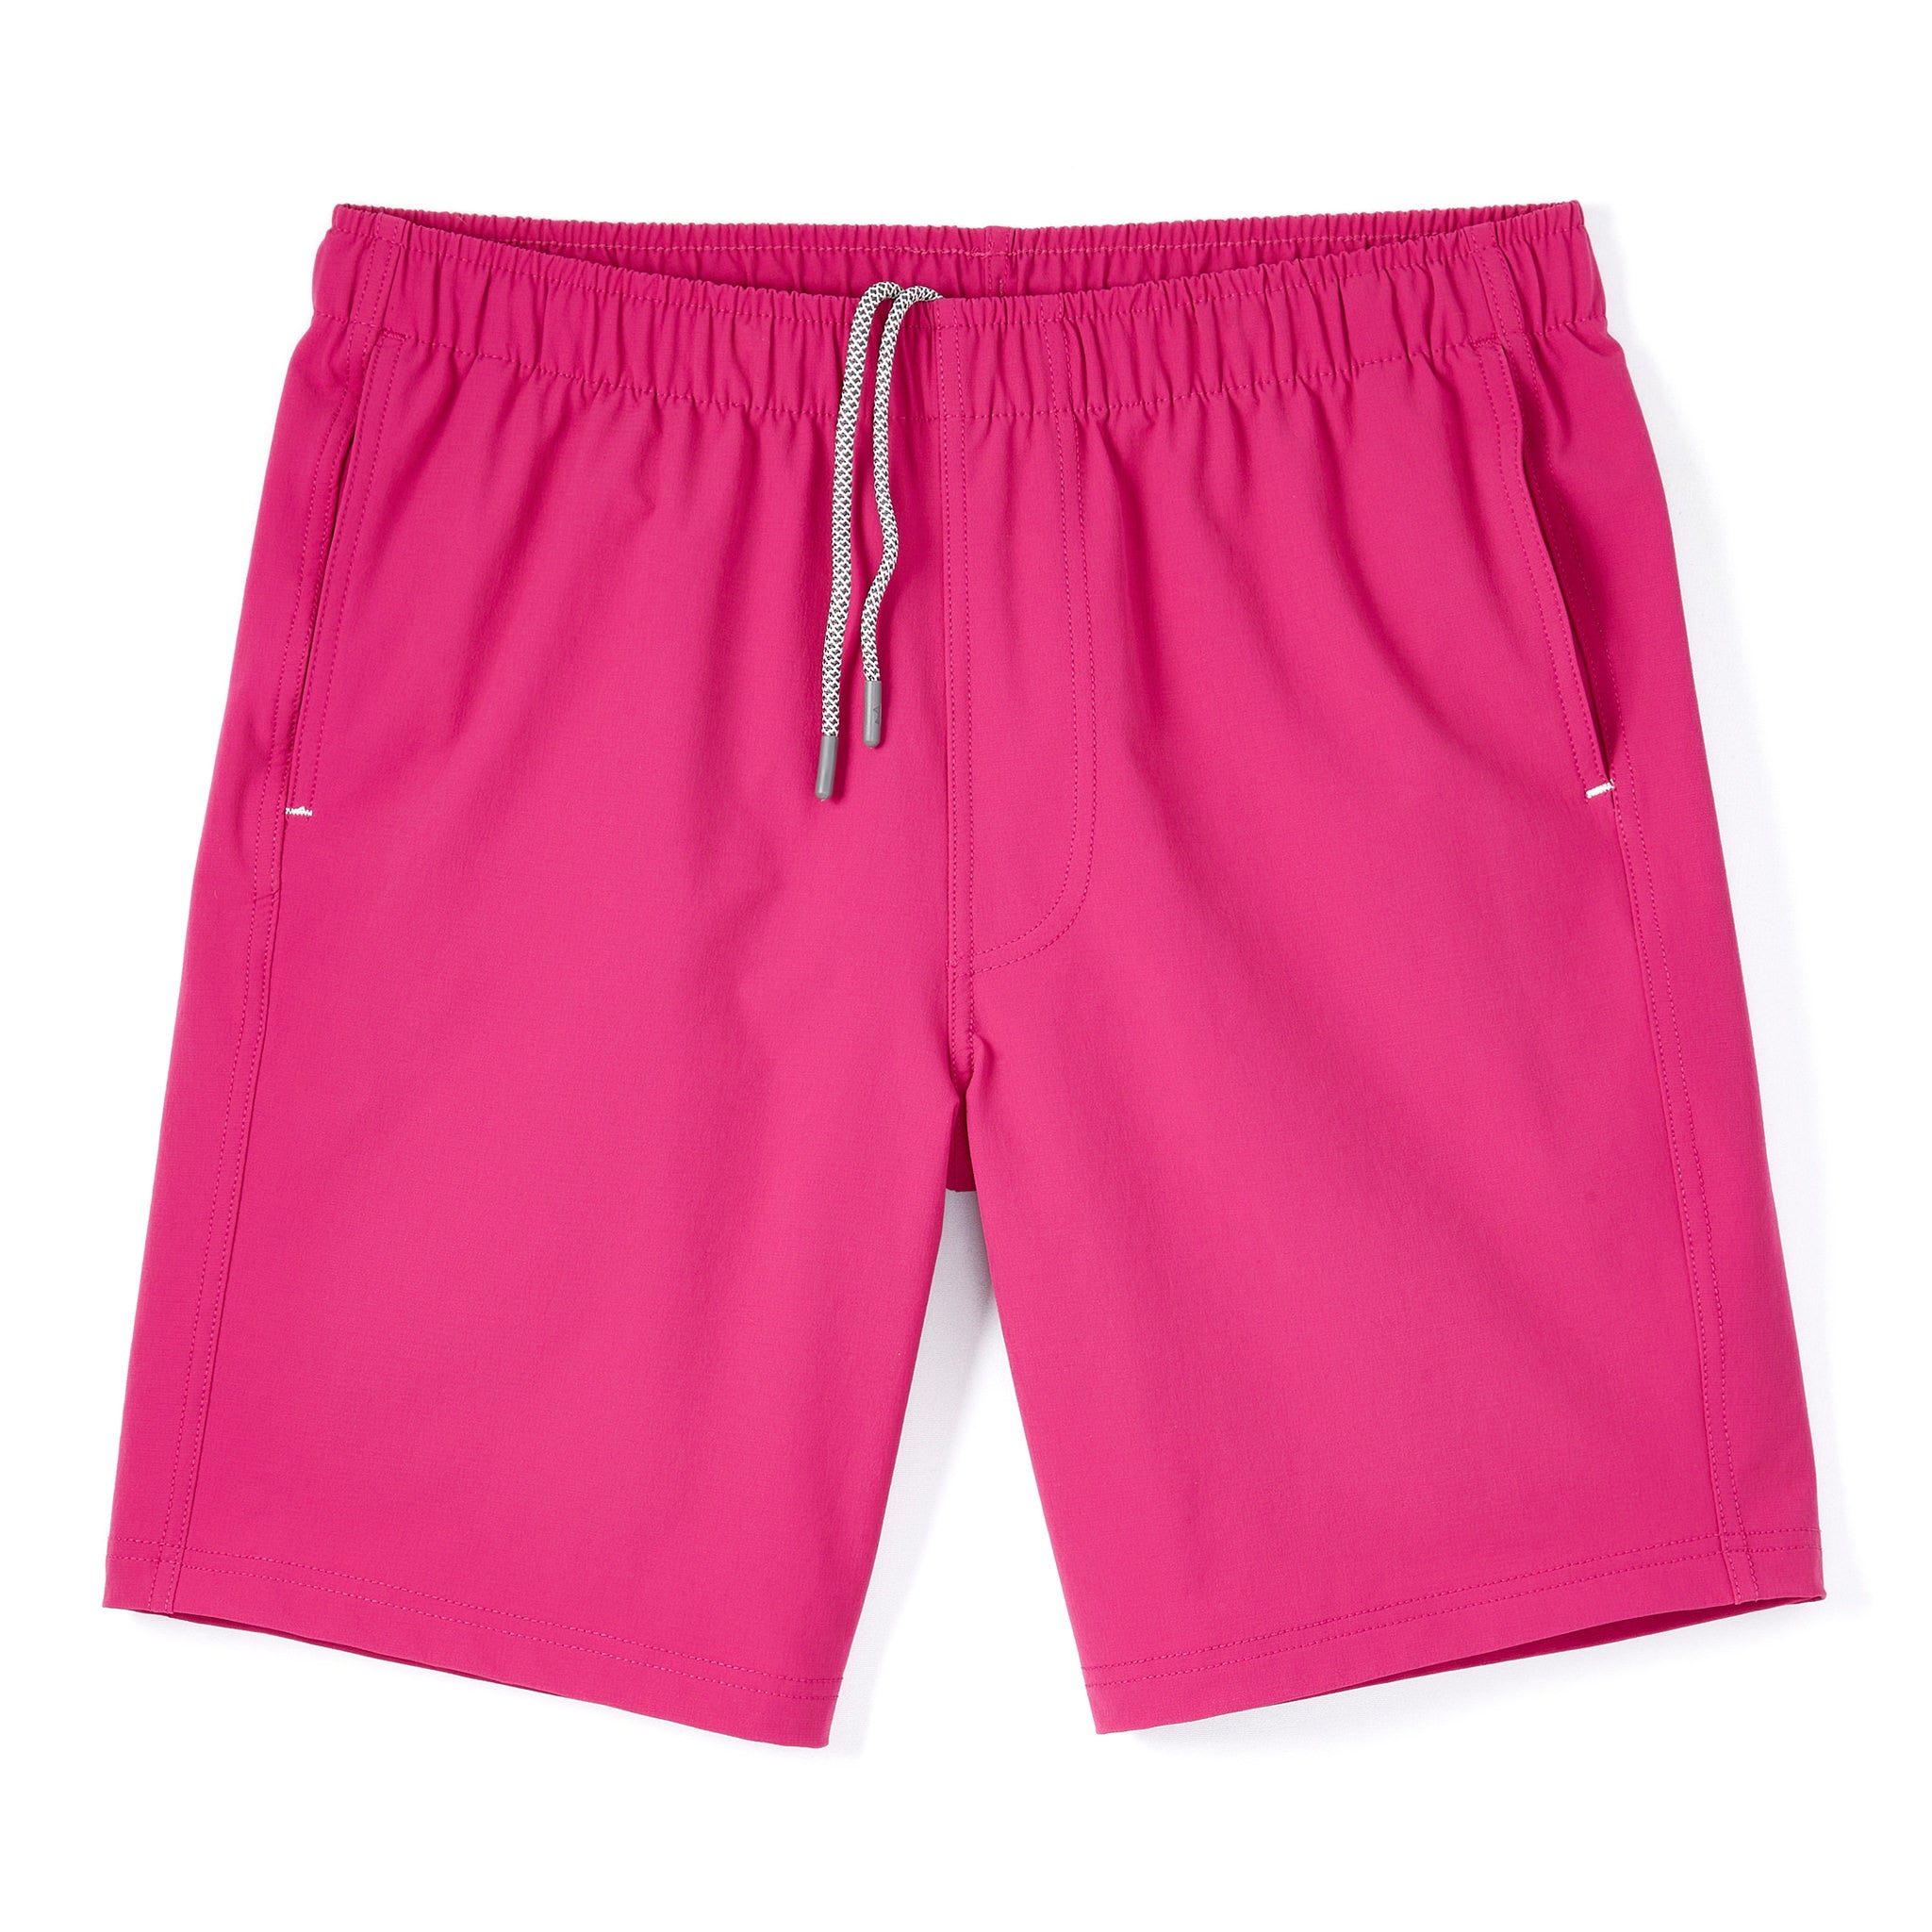 Everyday Short in Hyperberry Pink, Athletic Shorts, Myles Apparel